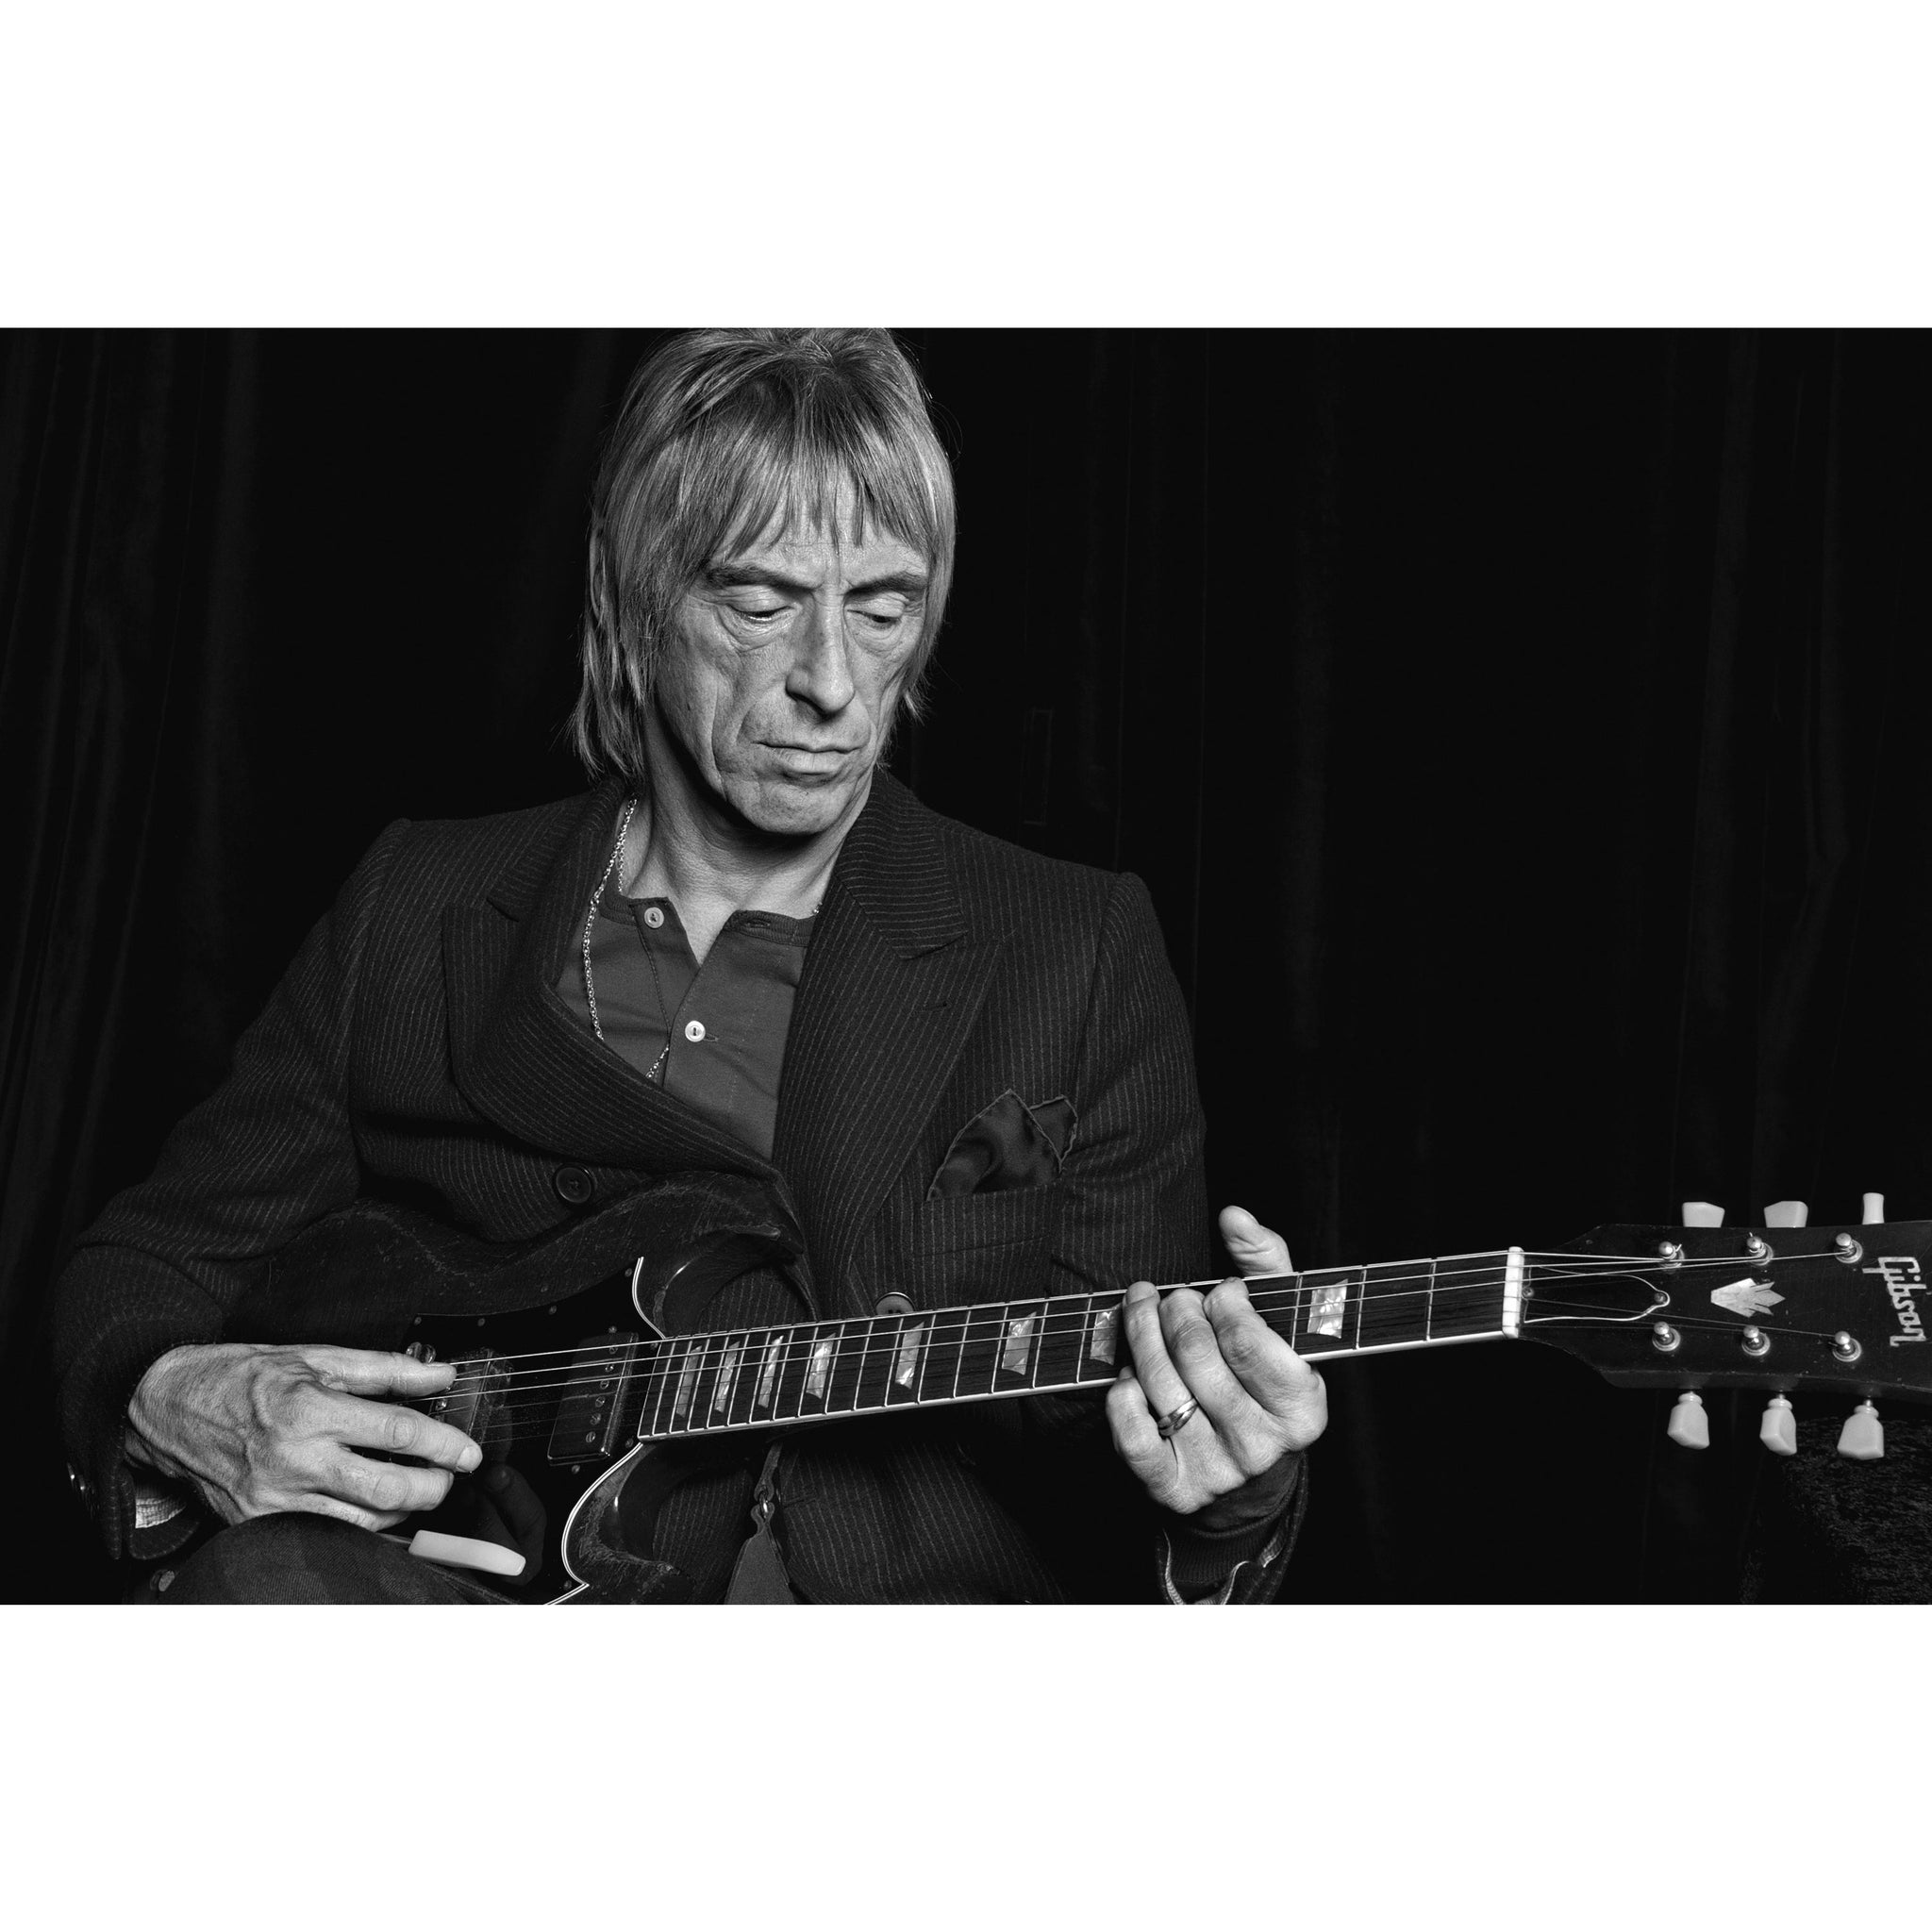 Paul Weller - Royal Albert Hall - Scarlet Page - Limited Edition Prints